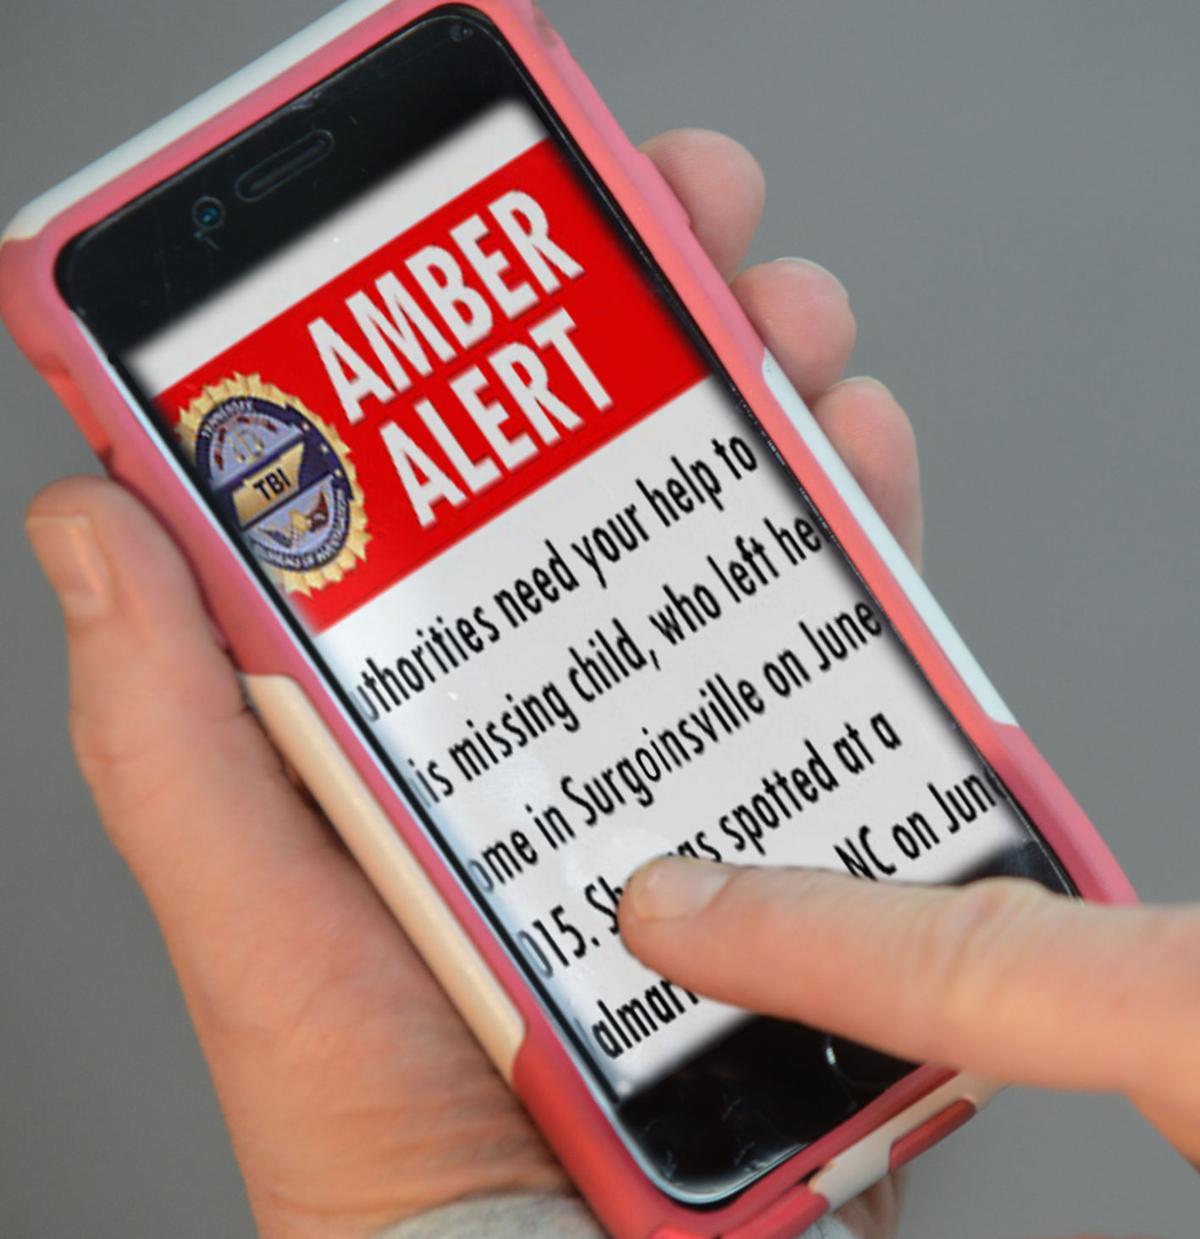 Though no AMBER Alerts issued locally, system ready if ...